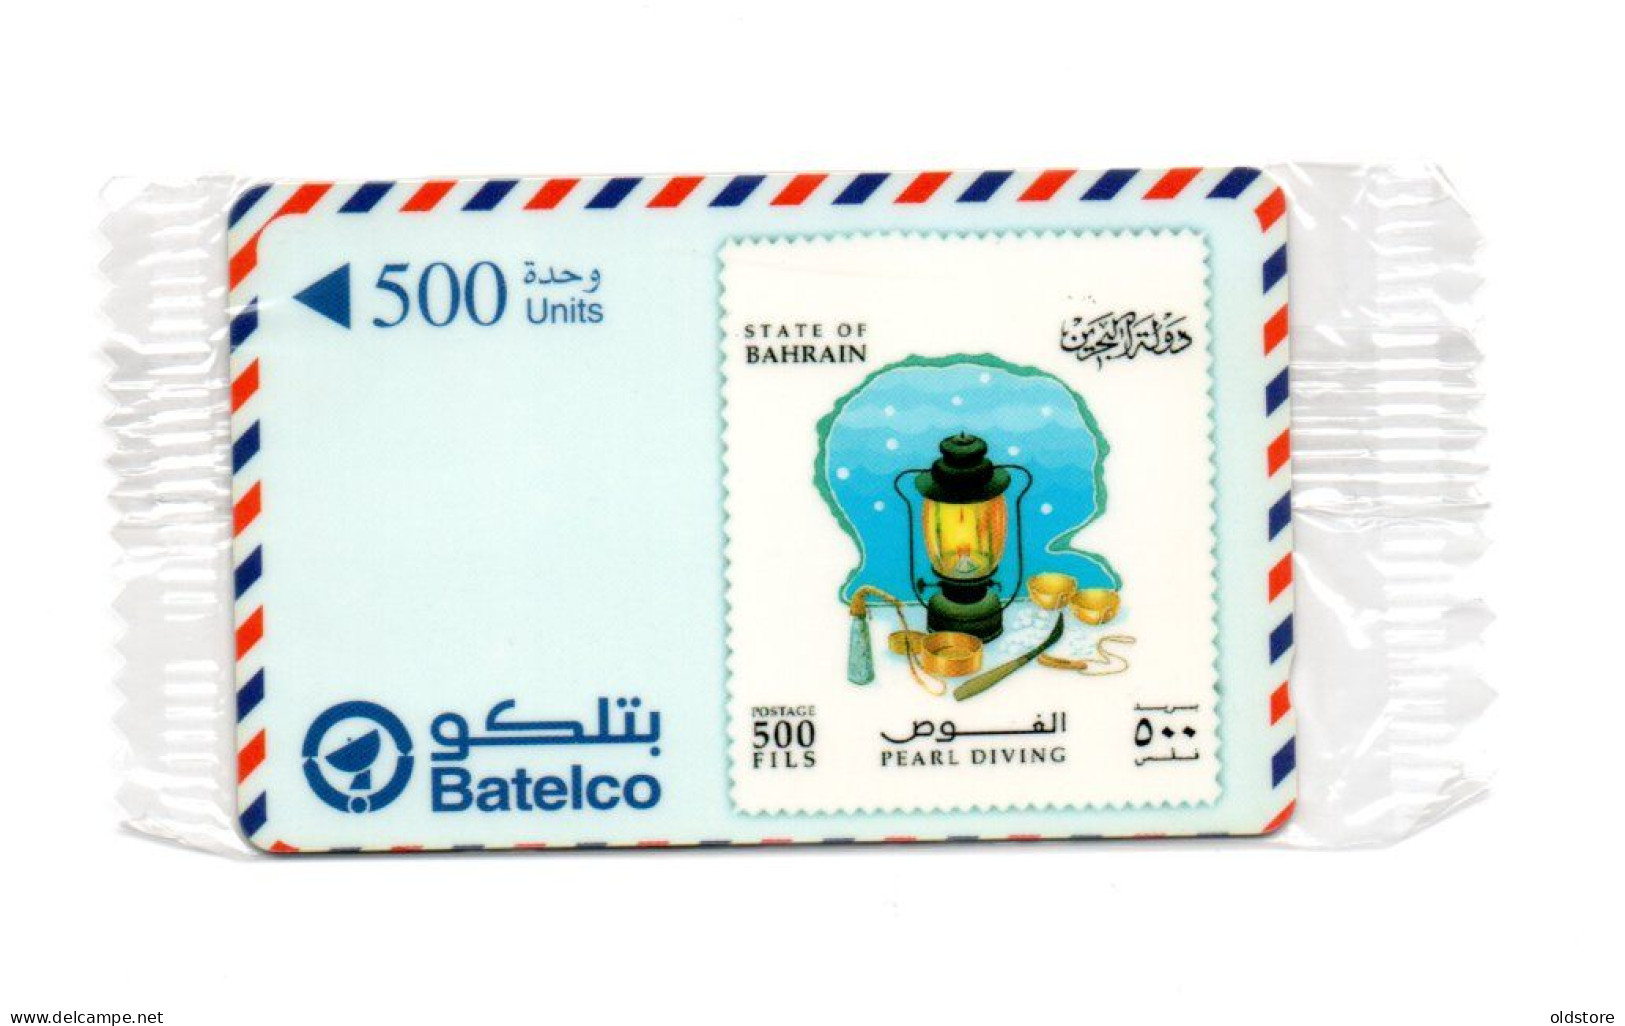 Bahrain Phonecards - (diving 5) - Mint Card - Low Serial Number (000035 ) - 500Units - ND 1999 - Batelco - Bahrain